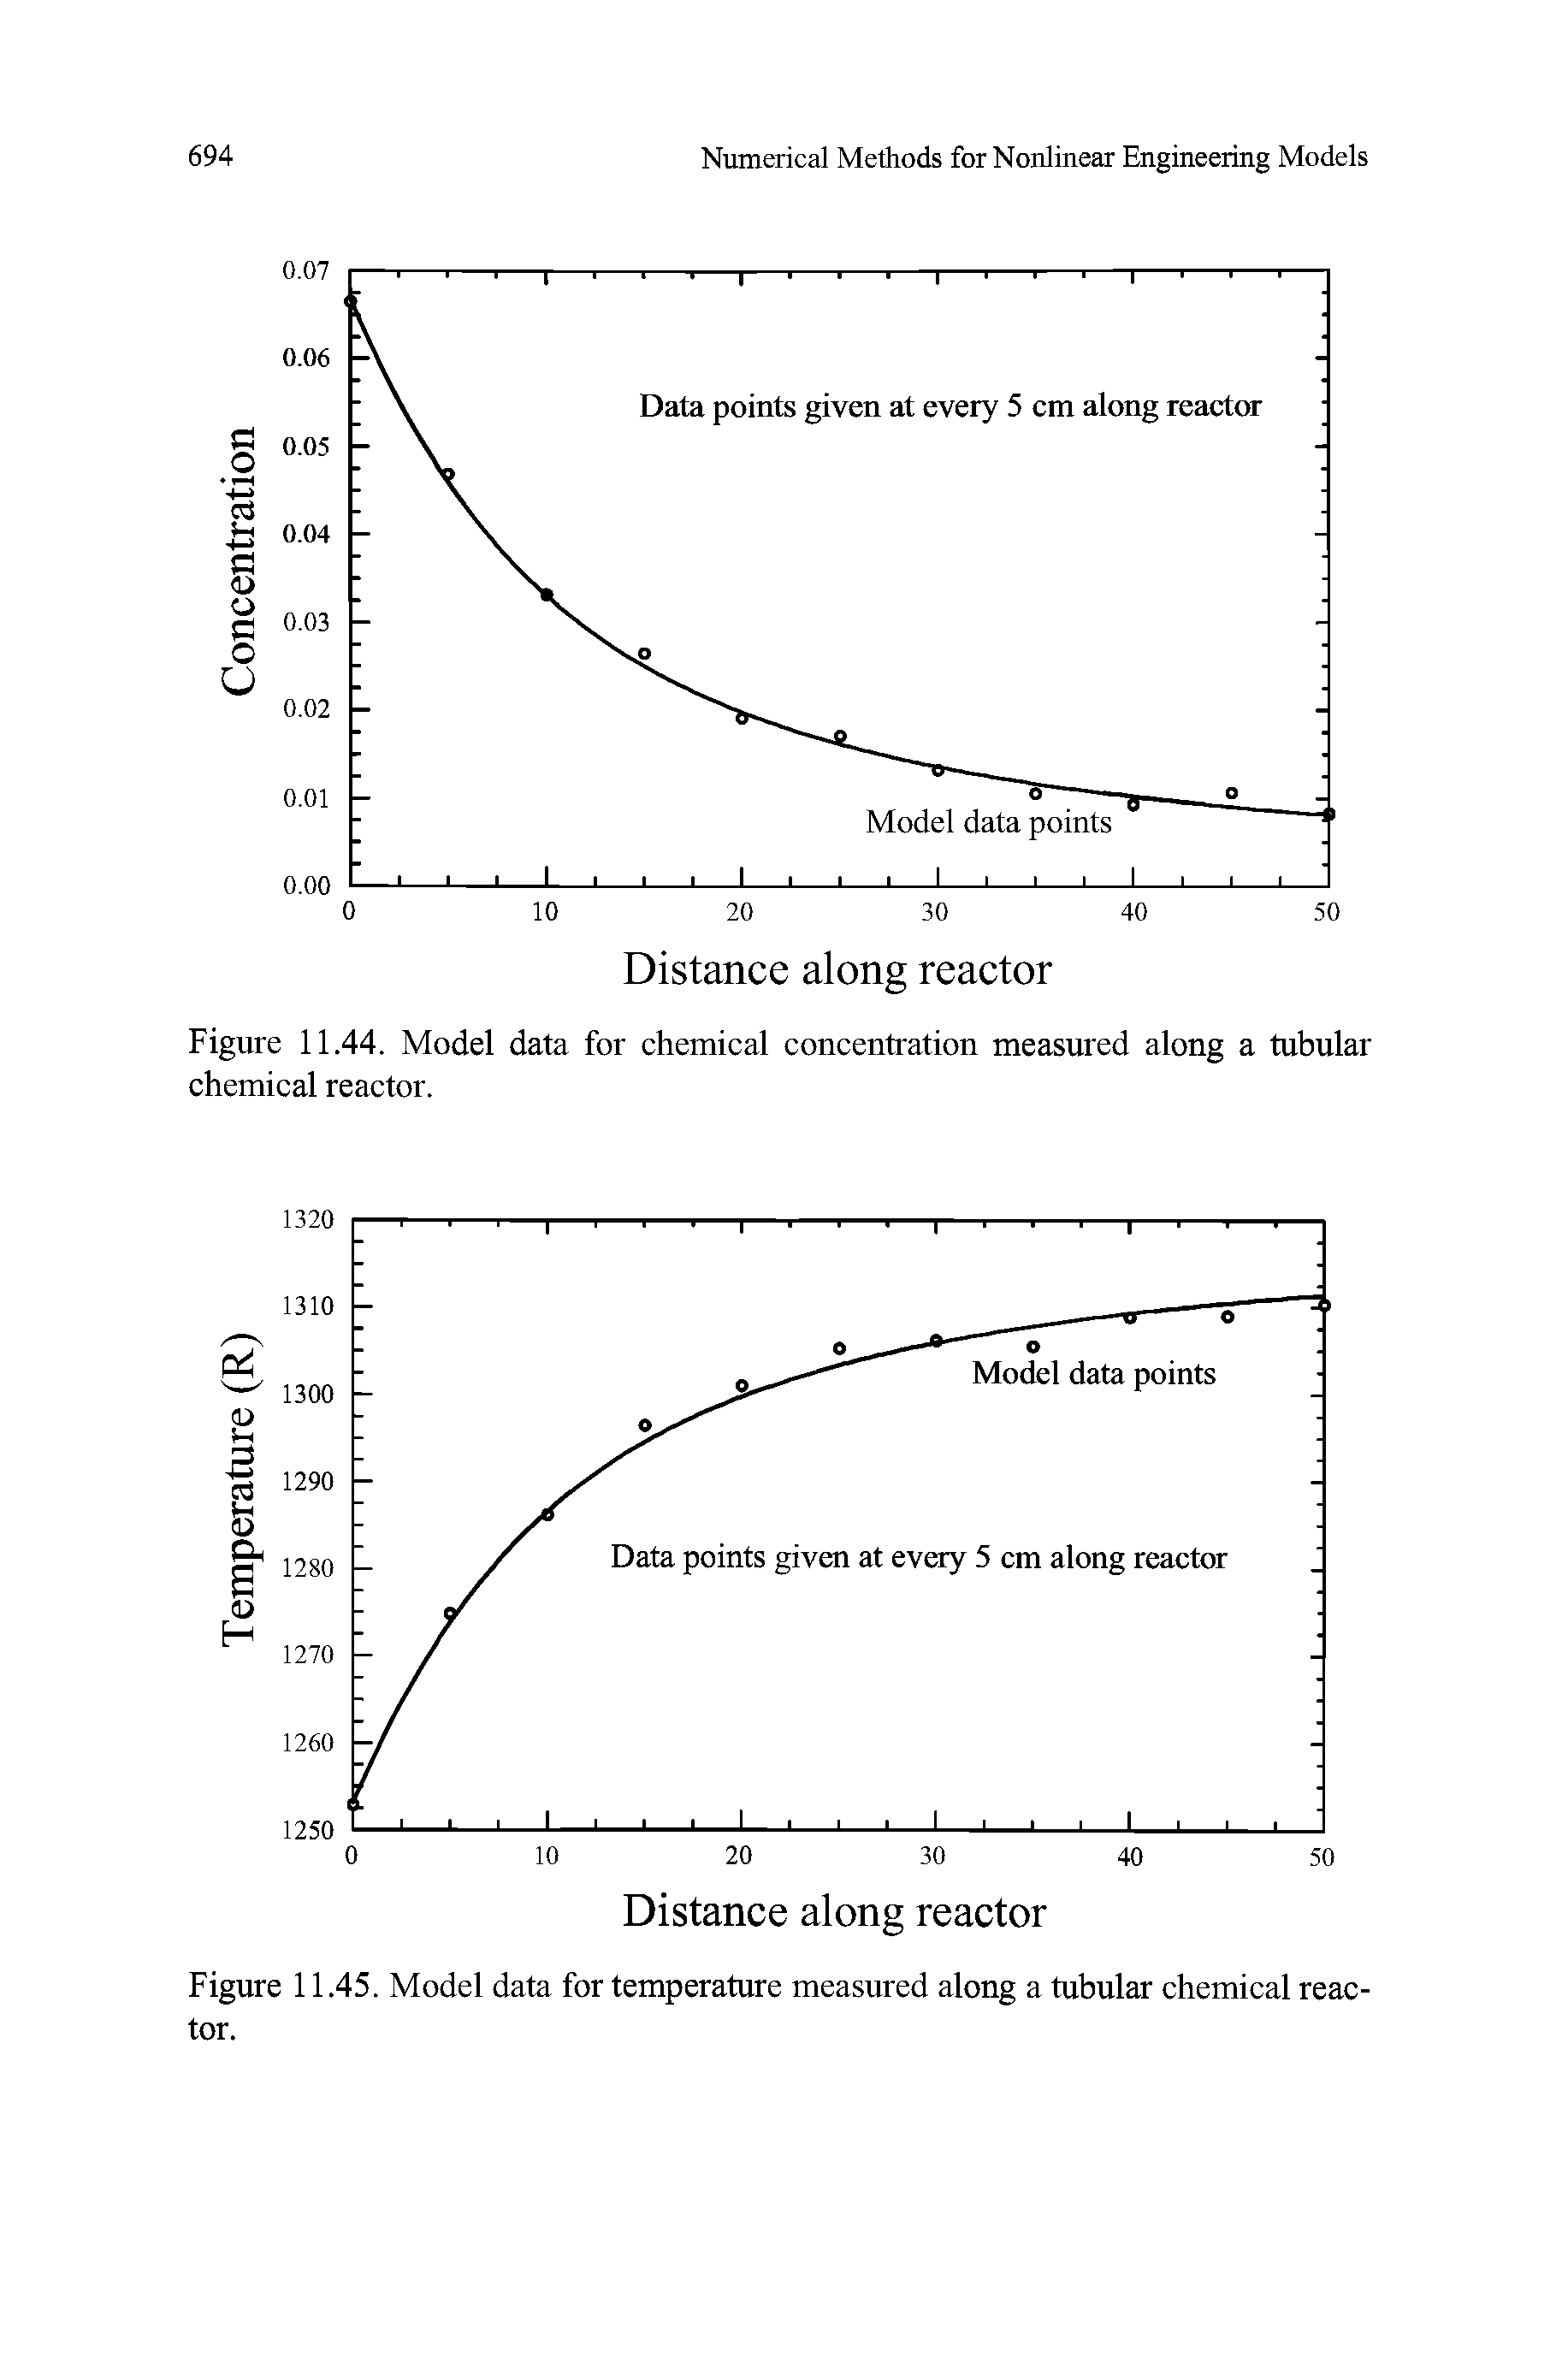 Figure 11.44. Model data for chemical concentration measured along a tubular chemical reactor.